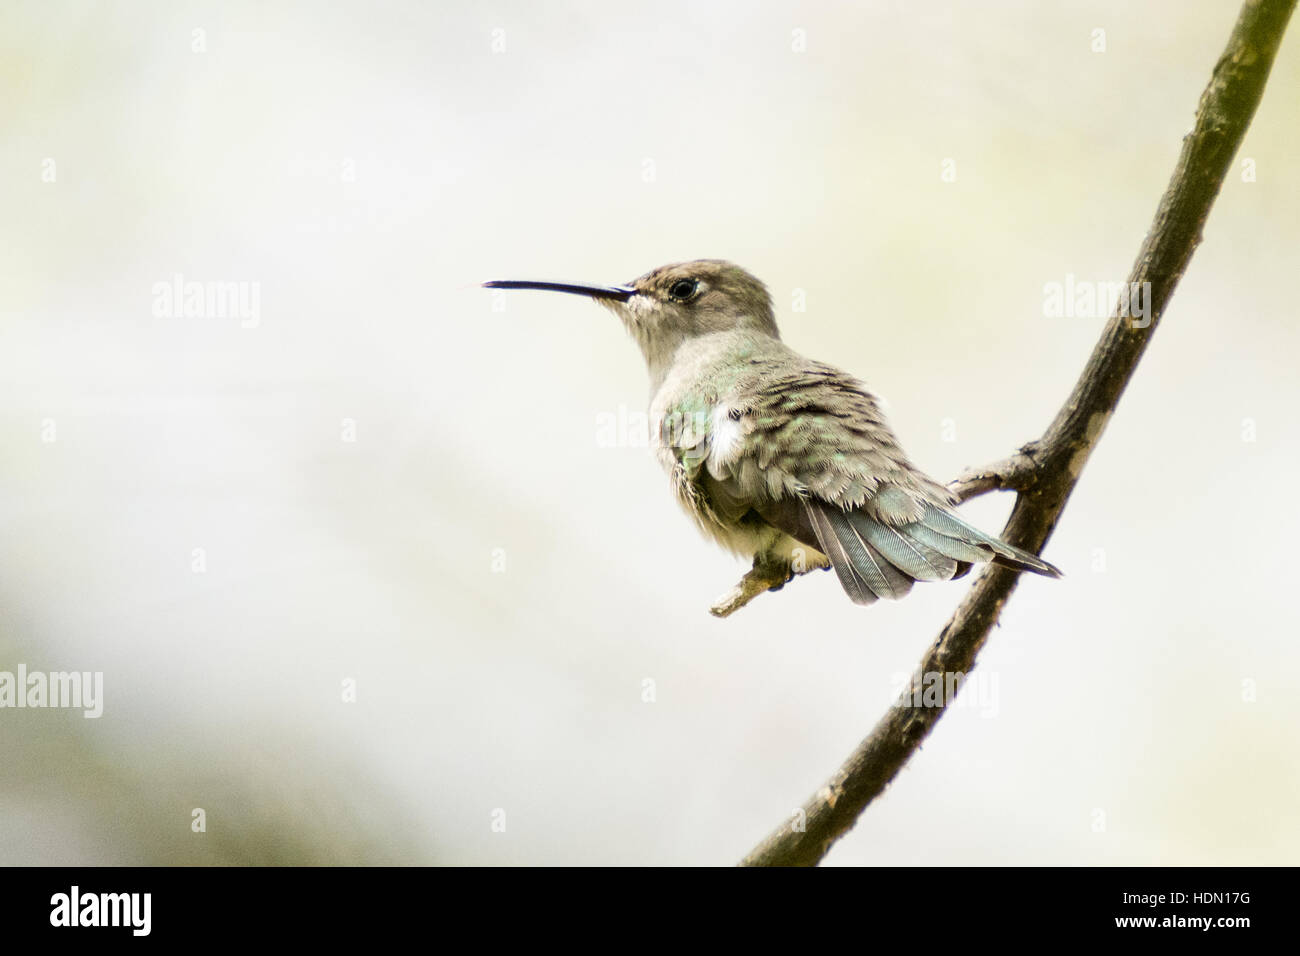 Tumbes Hummingbird (Leucippus baeri) perched on branch in its natural dry forest habitat in northern Peru Stock Photo